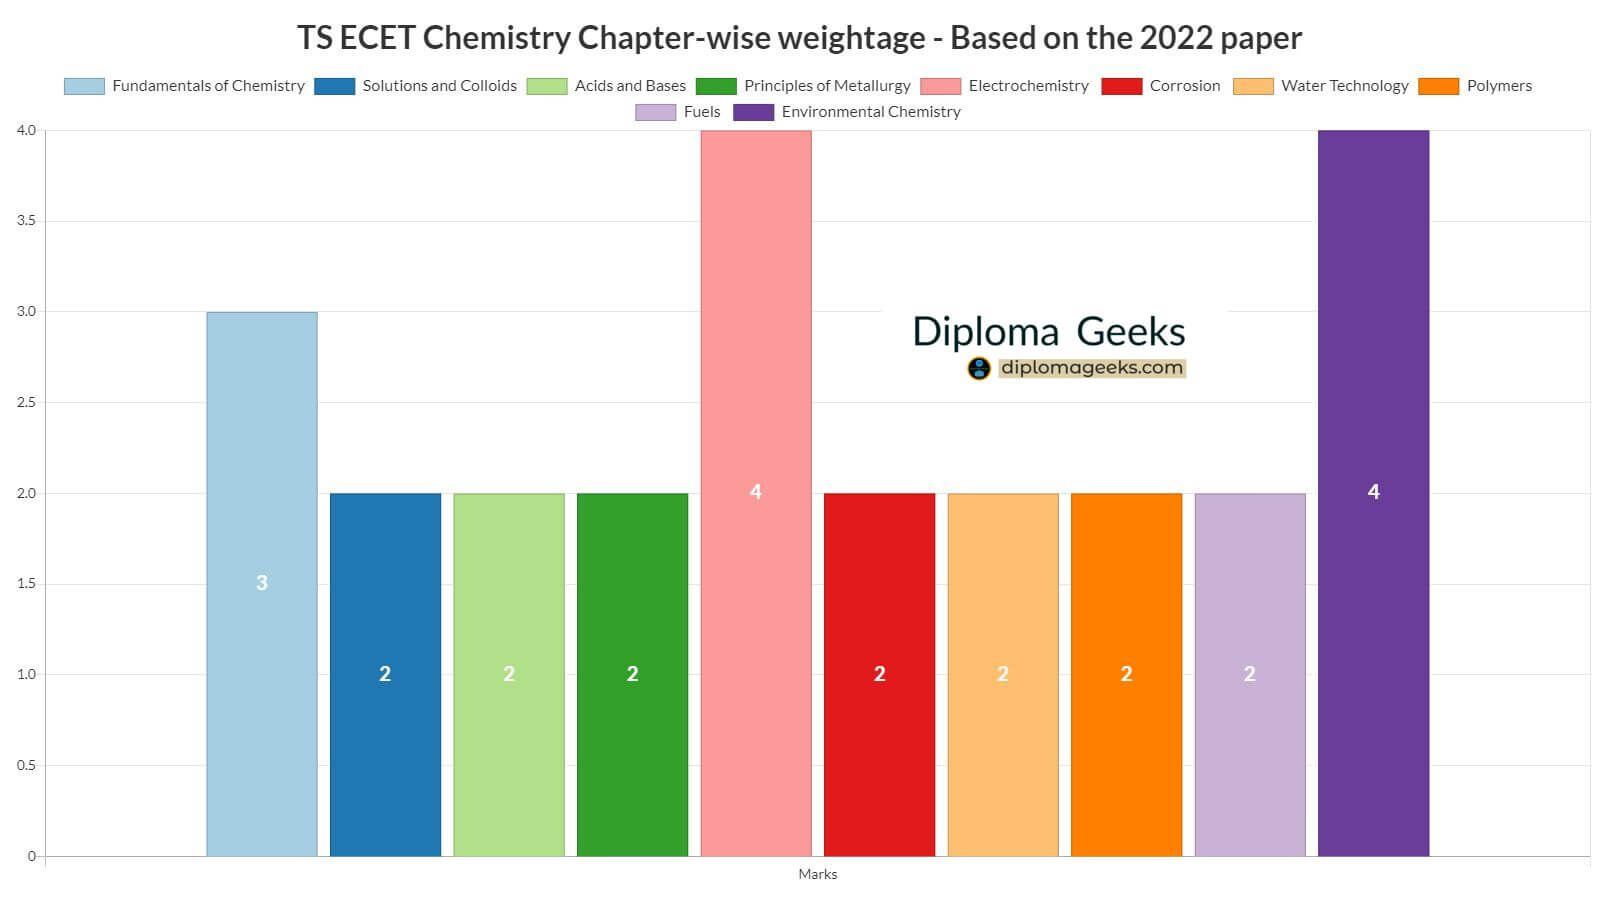 TS ECET Chemistry Chapter-wise weightage